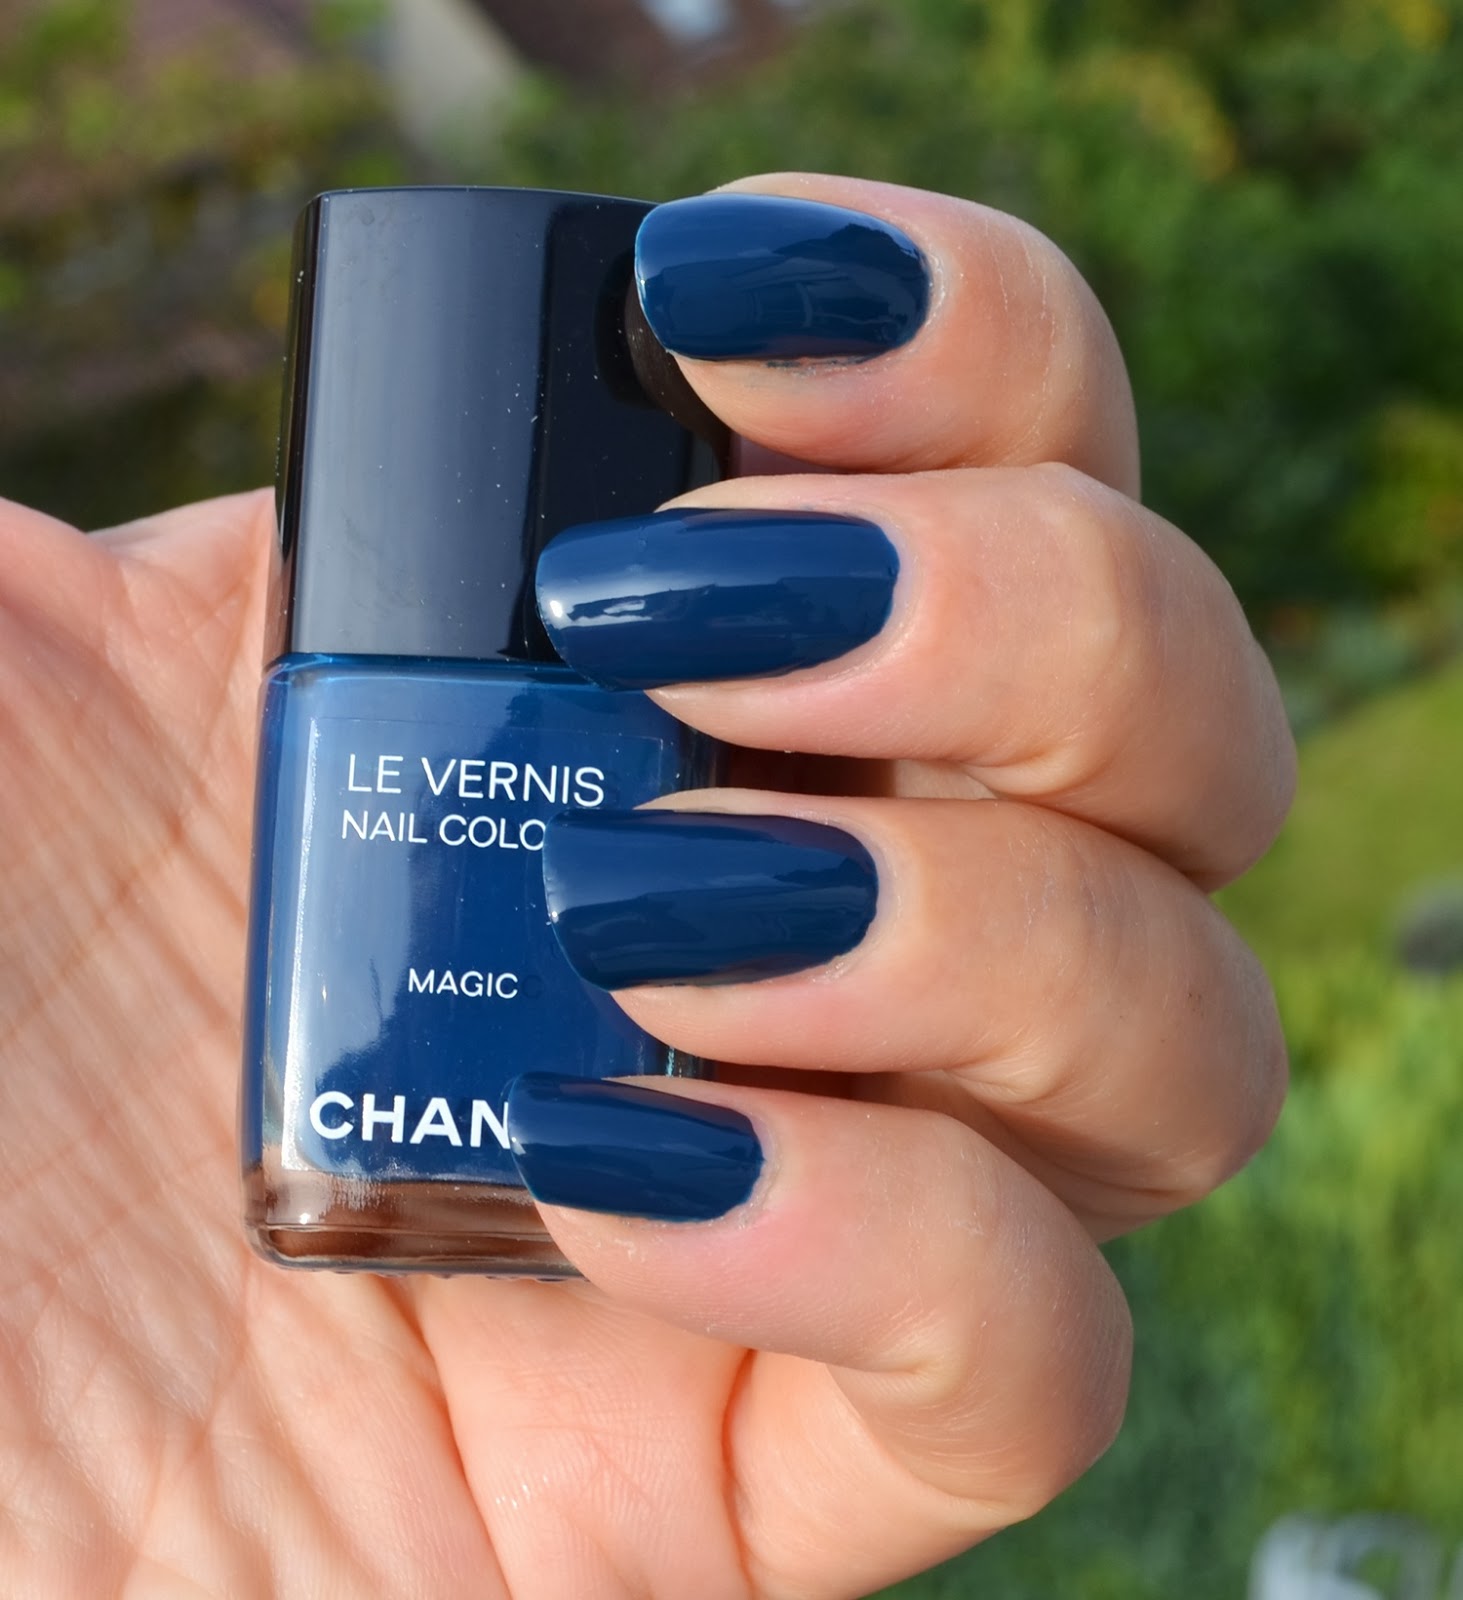 Chanel Le Vernis Cosmic & Magic, Fashion Night Out 2013 Nail Polishes, Review & Comparison | Color Me Loud